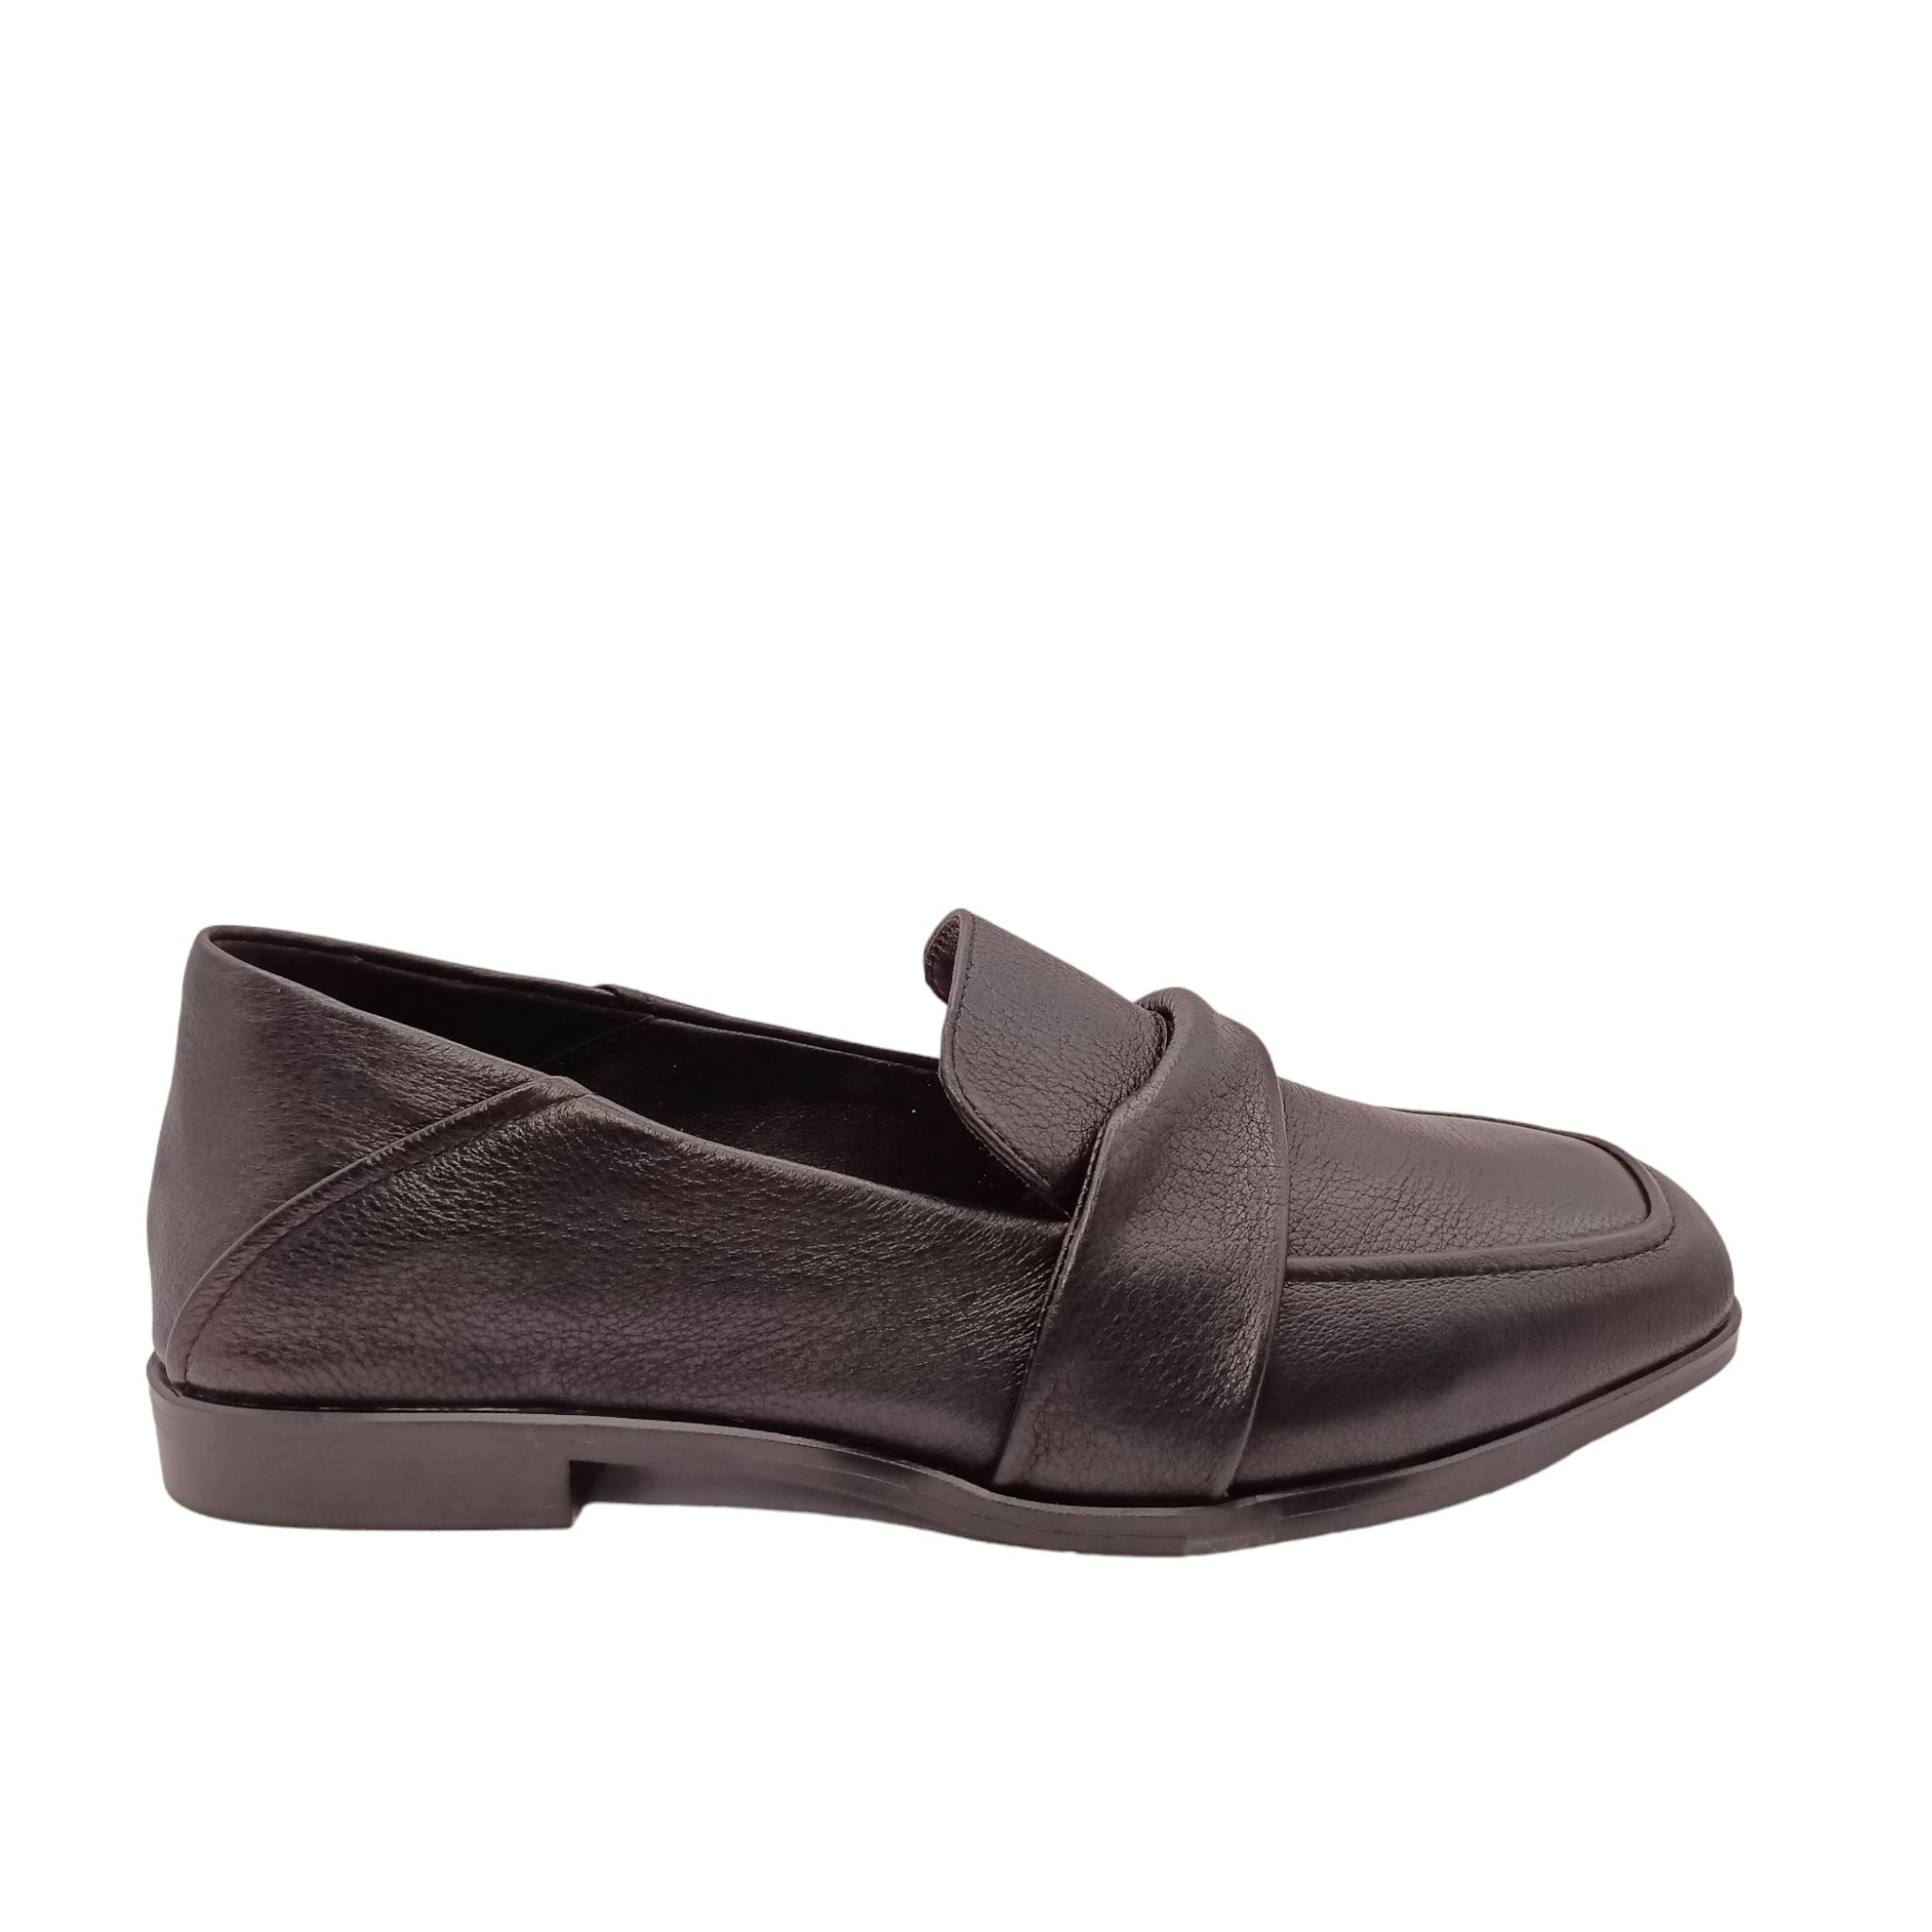 Shop Zen - with shoe&amp;me - from Hush Puppies - Loafers - Loafer, Shoe, Summer, Winter, Womens